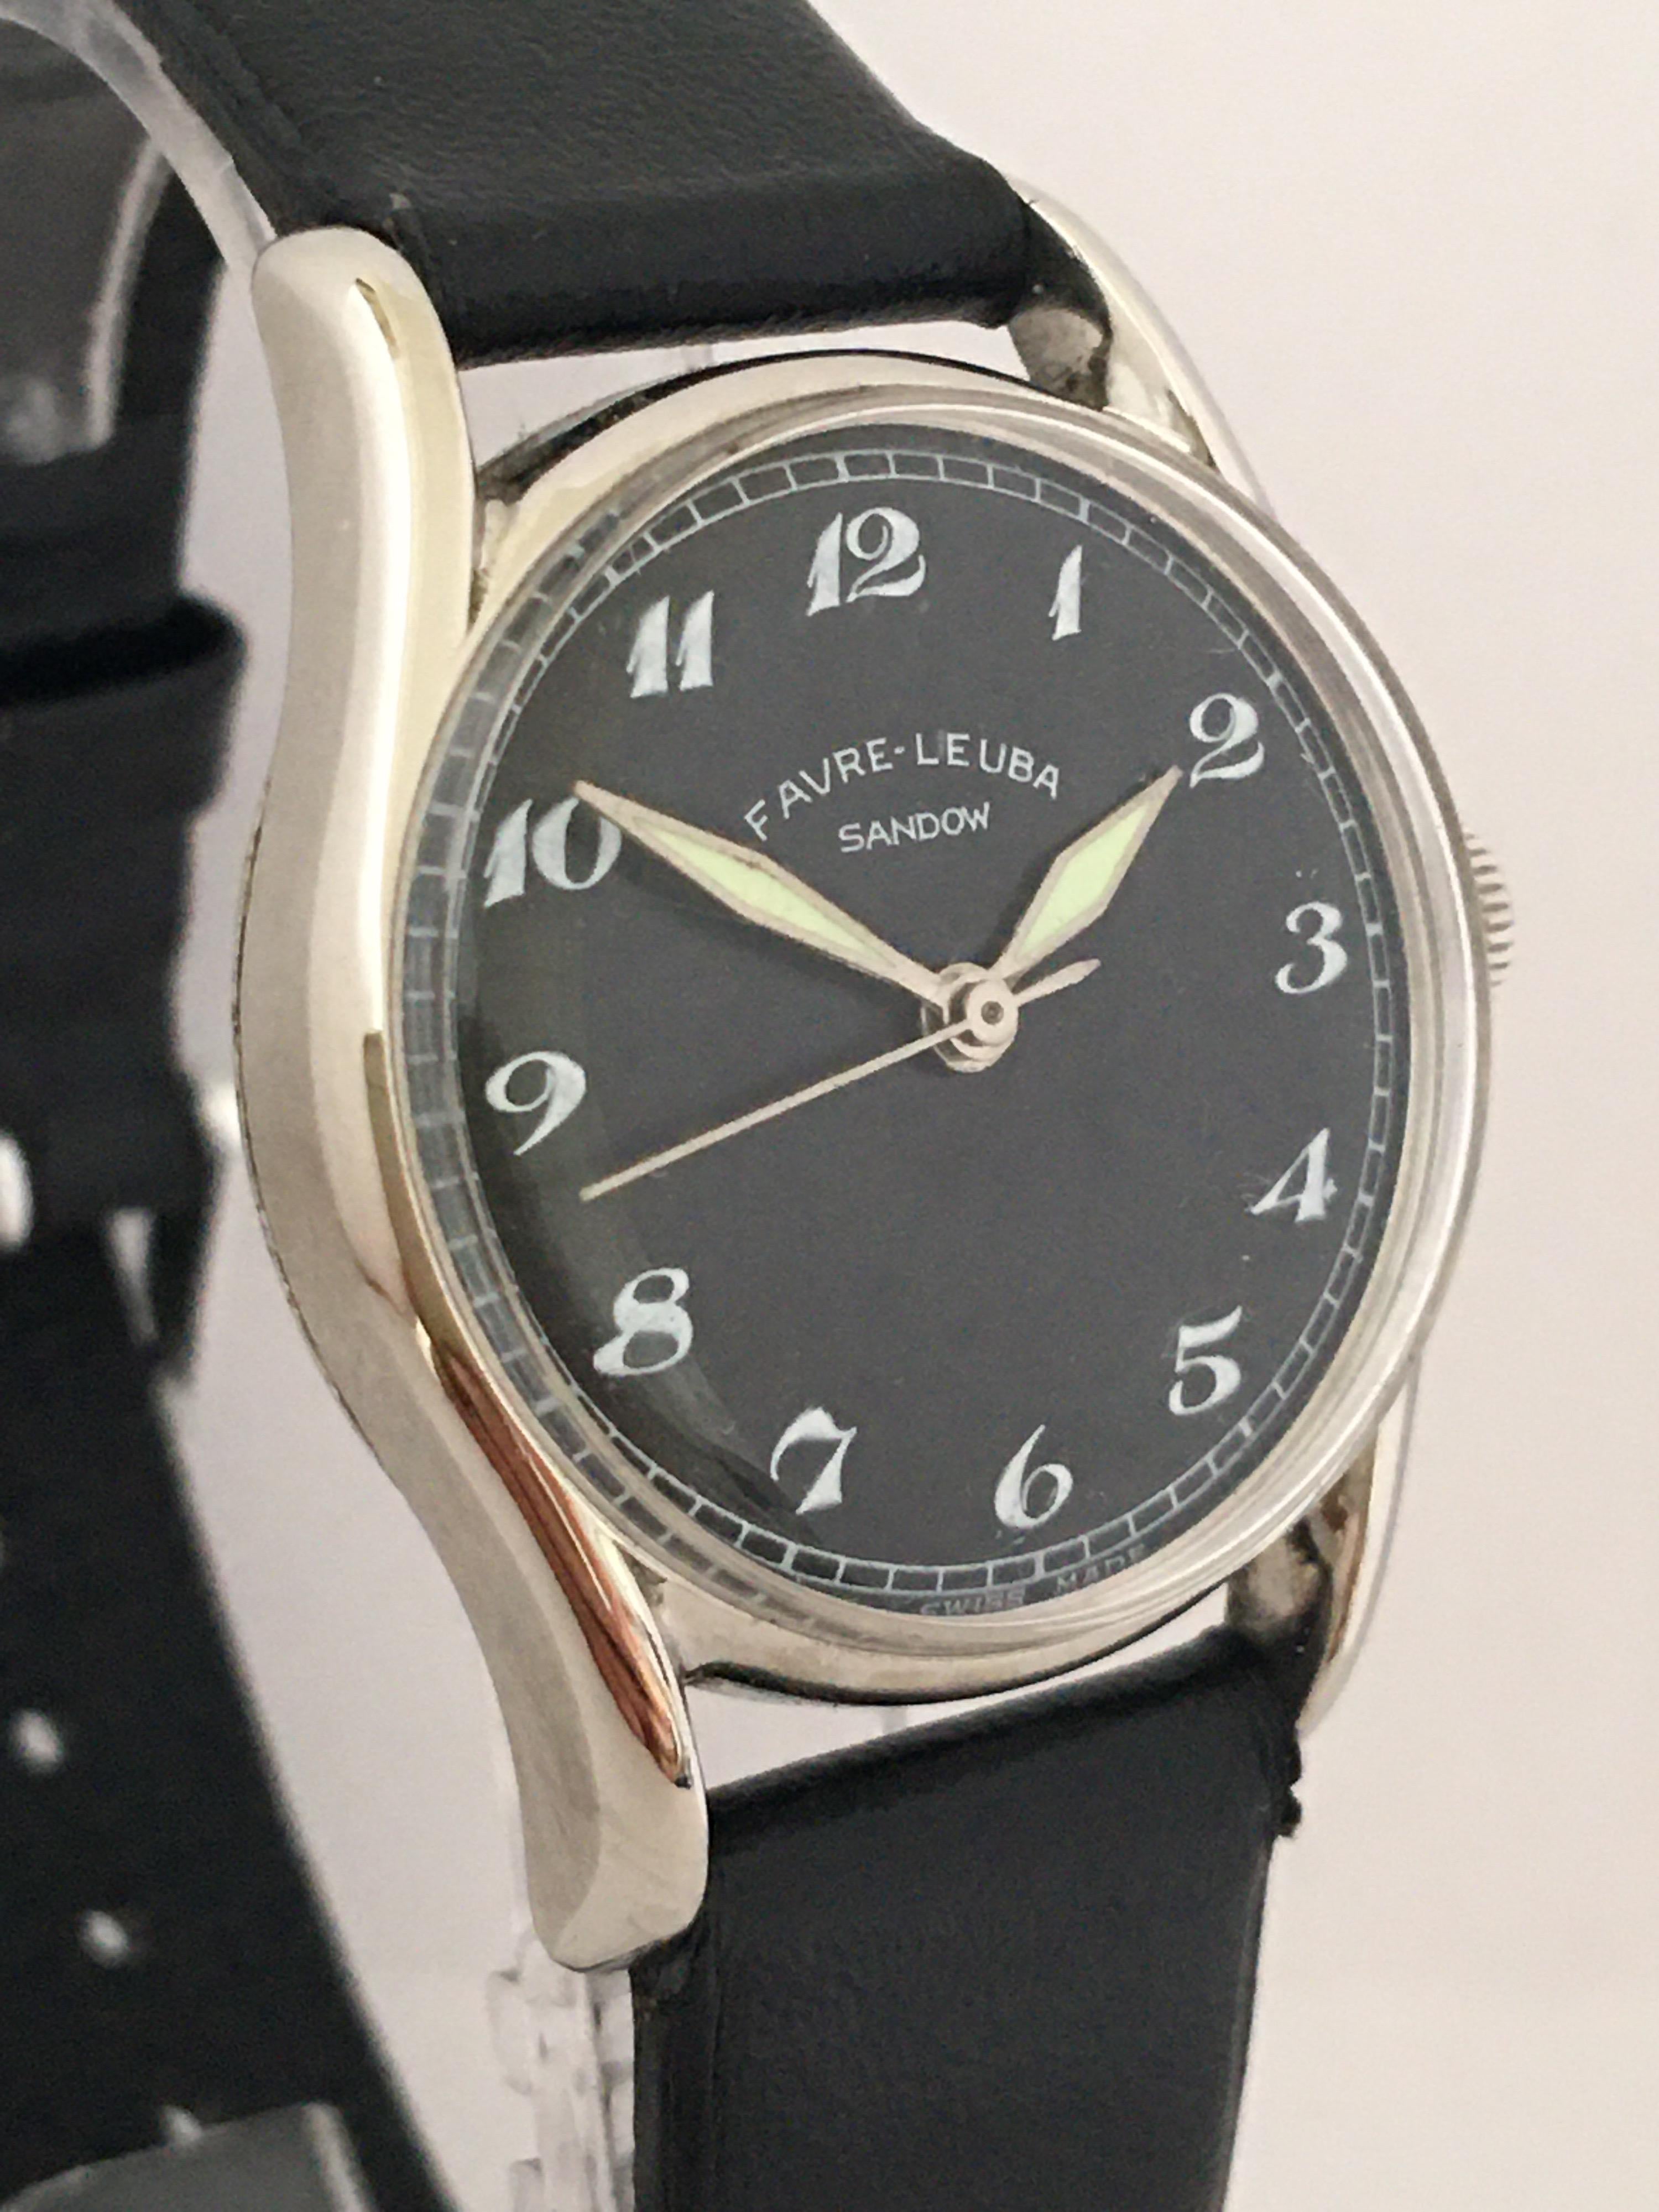 This beautiful manual winding vintage watch is in good working condition and it is ticking well. However, due to its age I cannot guarantee the time accuracy (7mins. Slow a day) 

please study the images carefully as form part of the description.